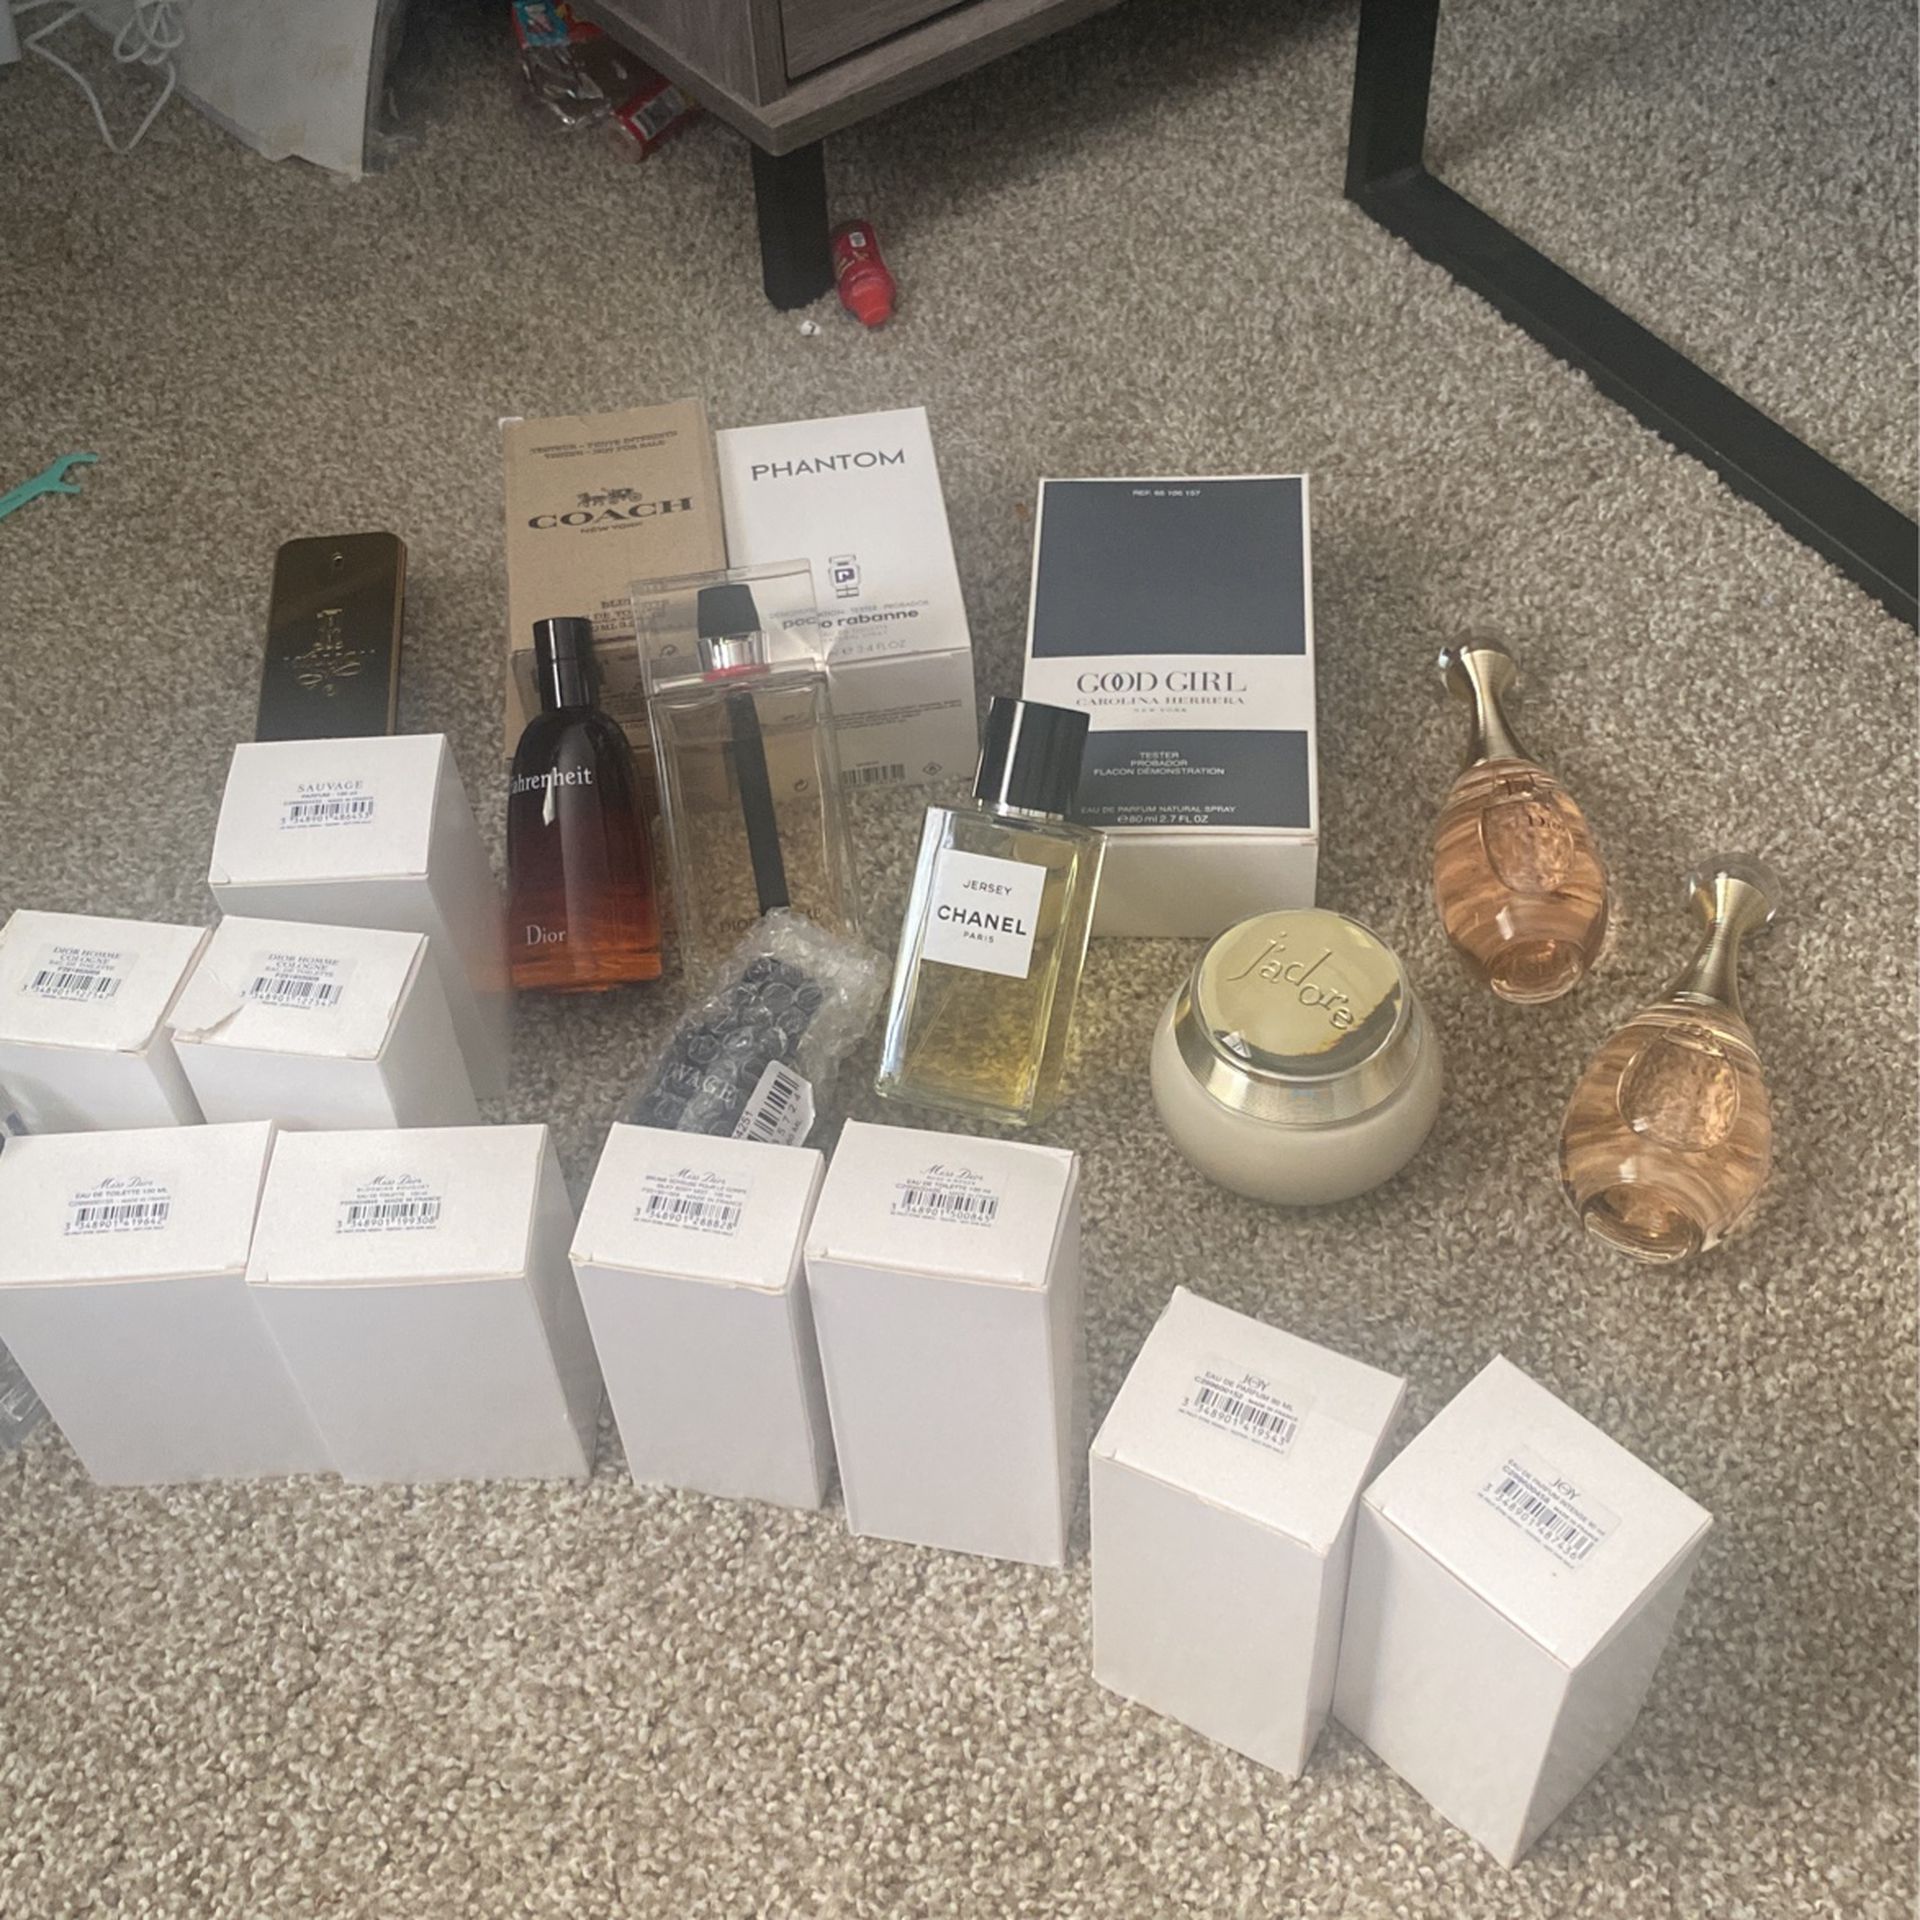 Brand New Dior Chanel J'dore Good Girl Pacco Rabanne Coach Homme Sauvage  Elixir Set Gift Perfume Cologne Fragrance Gucci for Sale in Long Beach, CA  - OfferUp